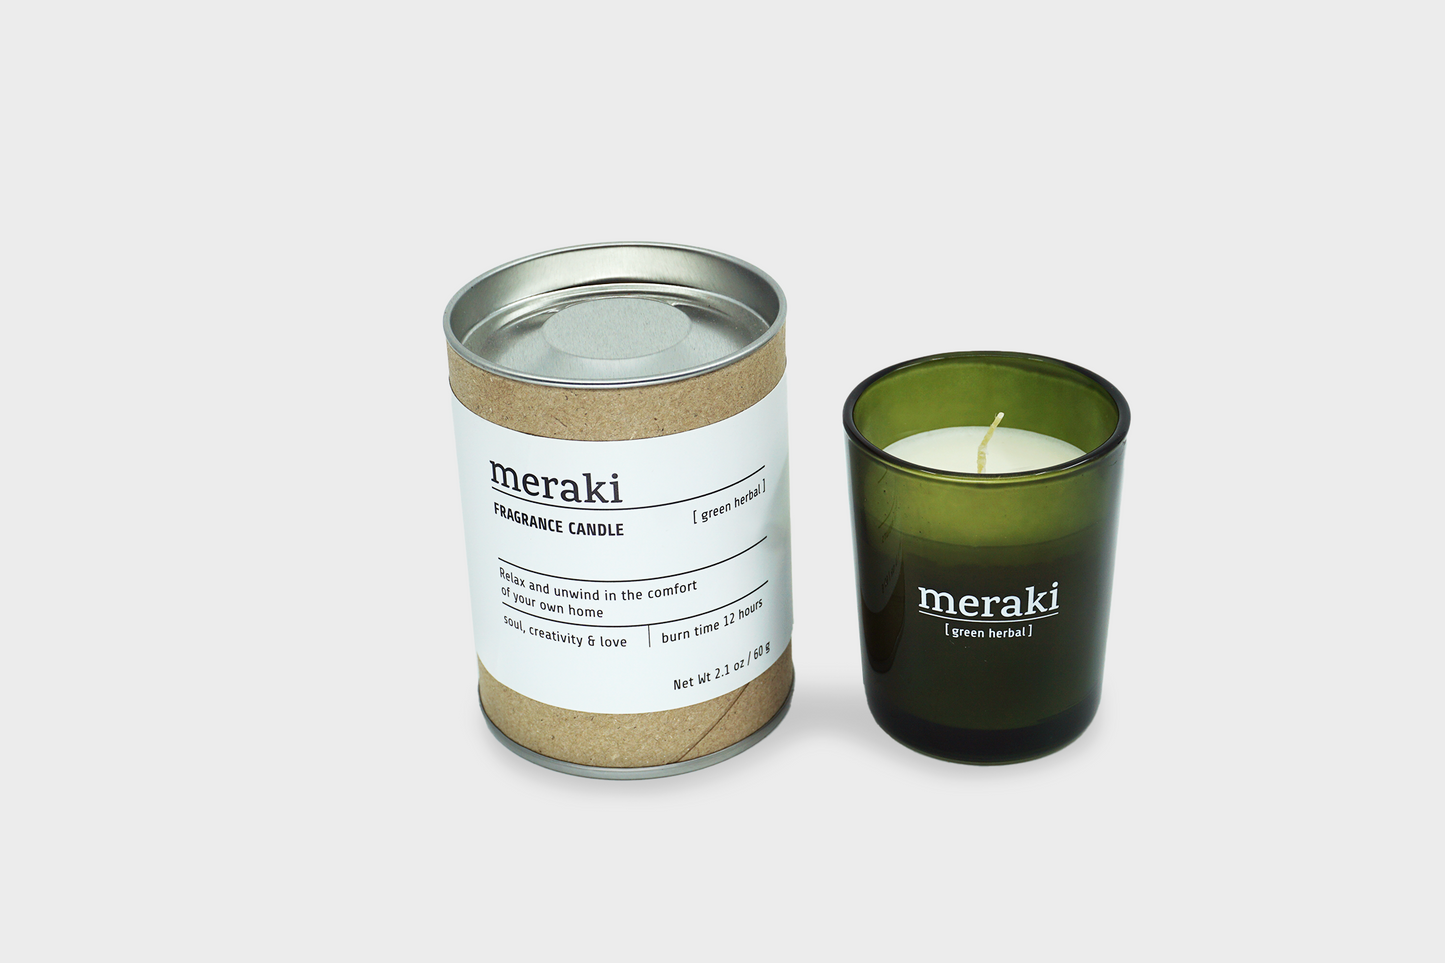 Green Herbal Candle with green glass in small size by Meraki